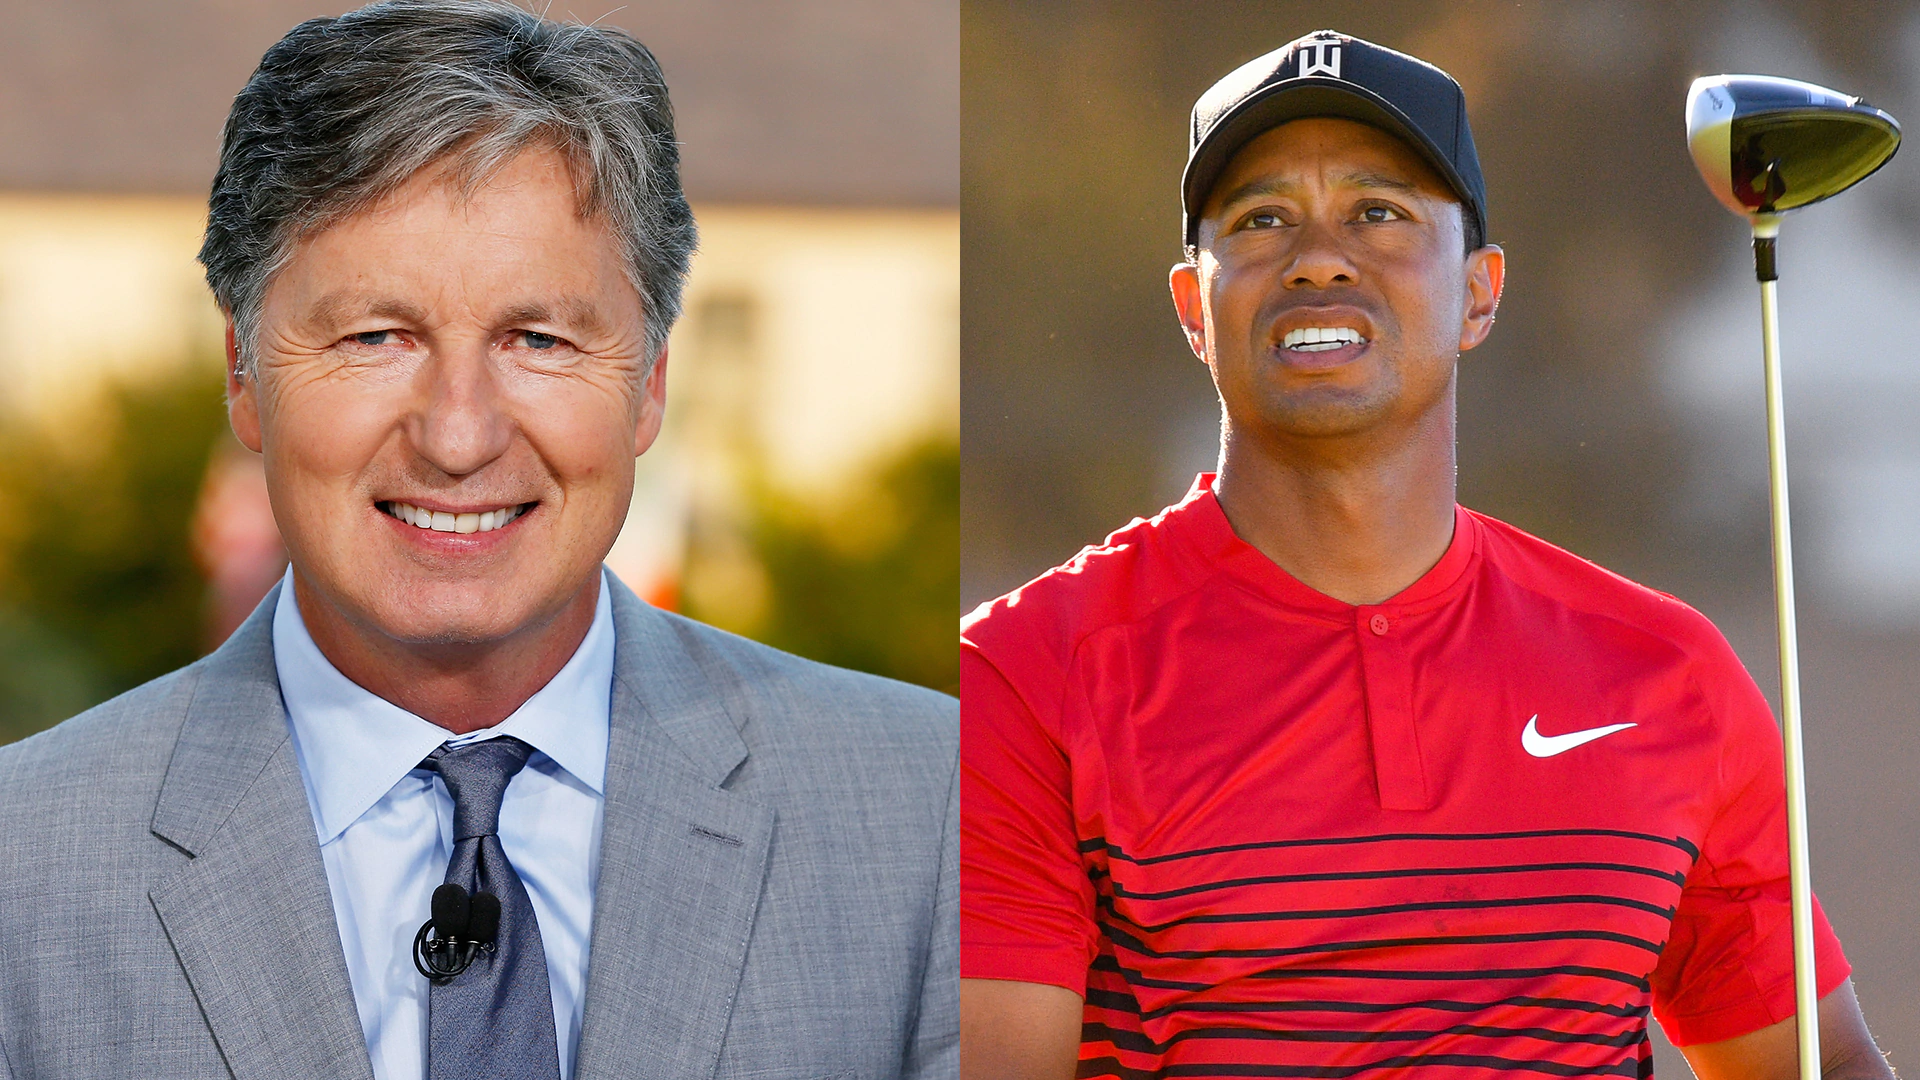 Podcast: Chamblee says he can fix Tiger in 'two minutes'